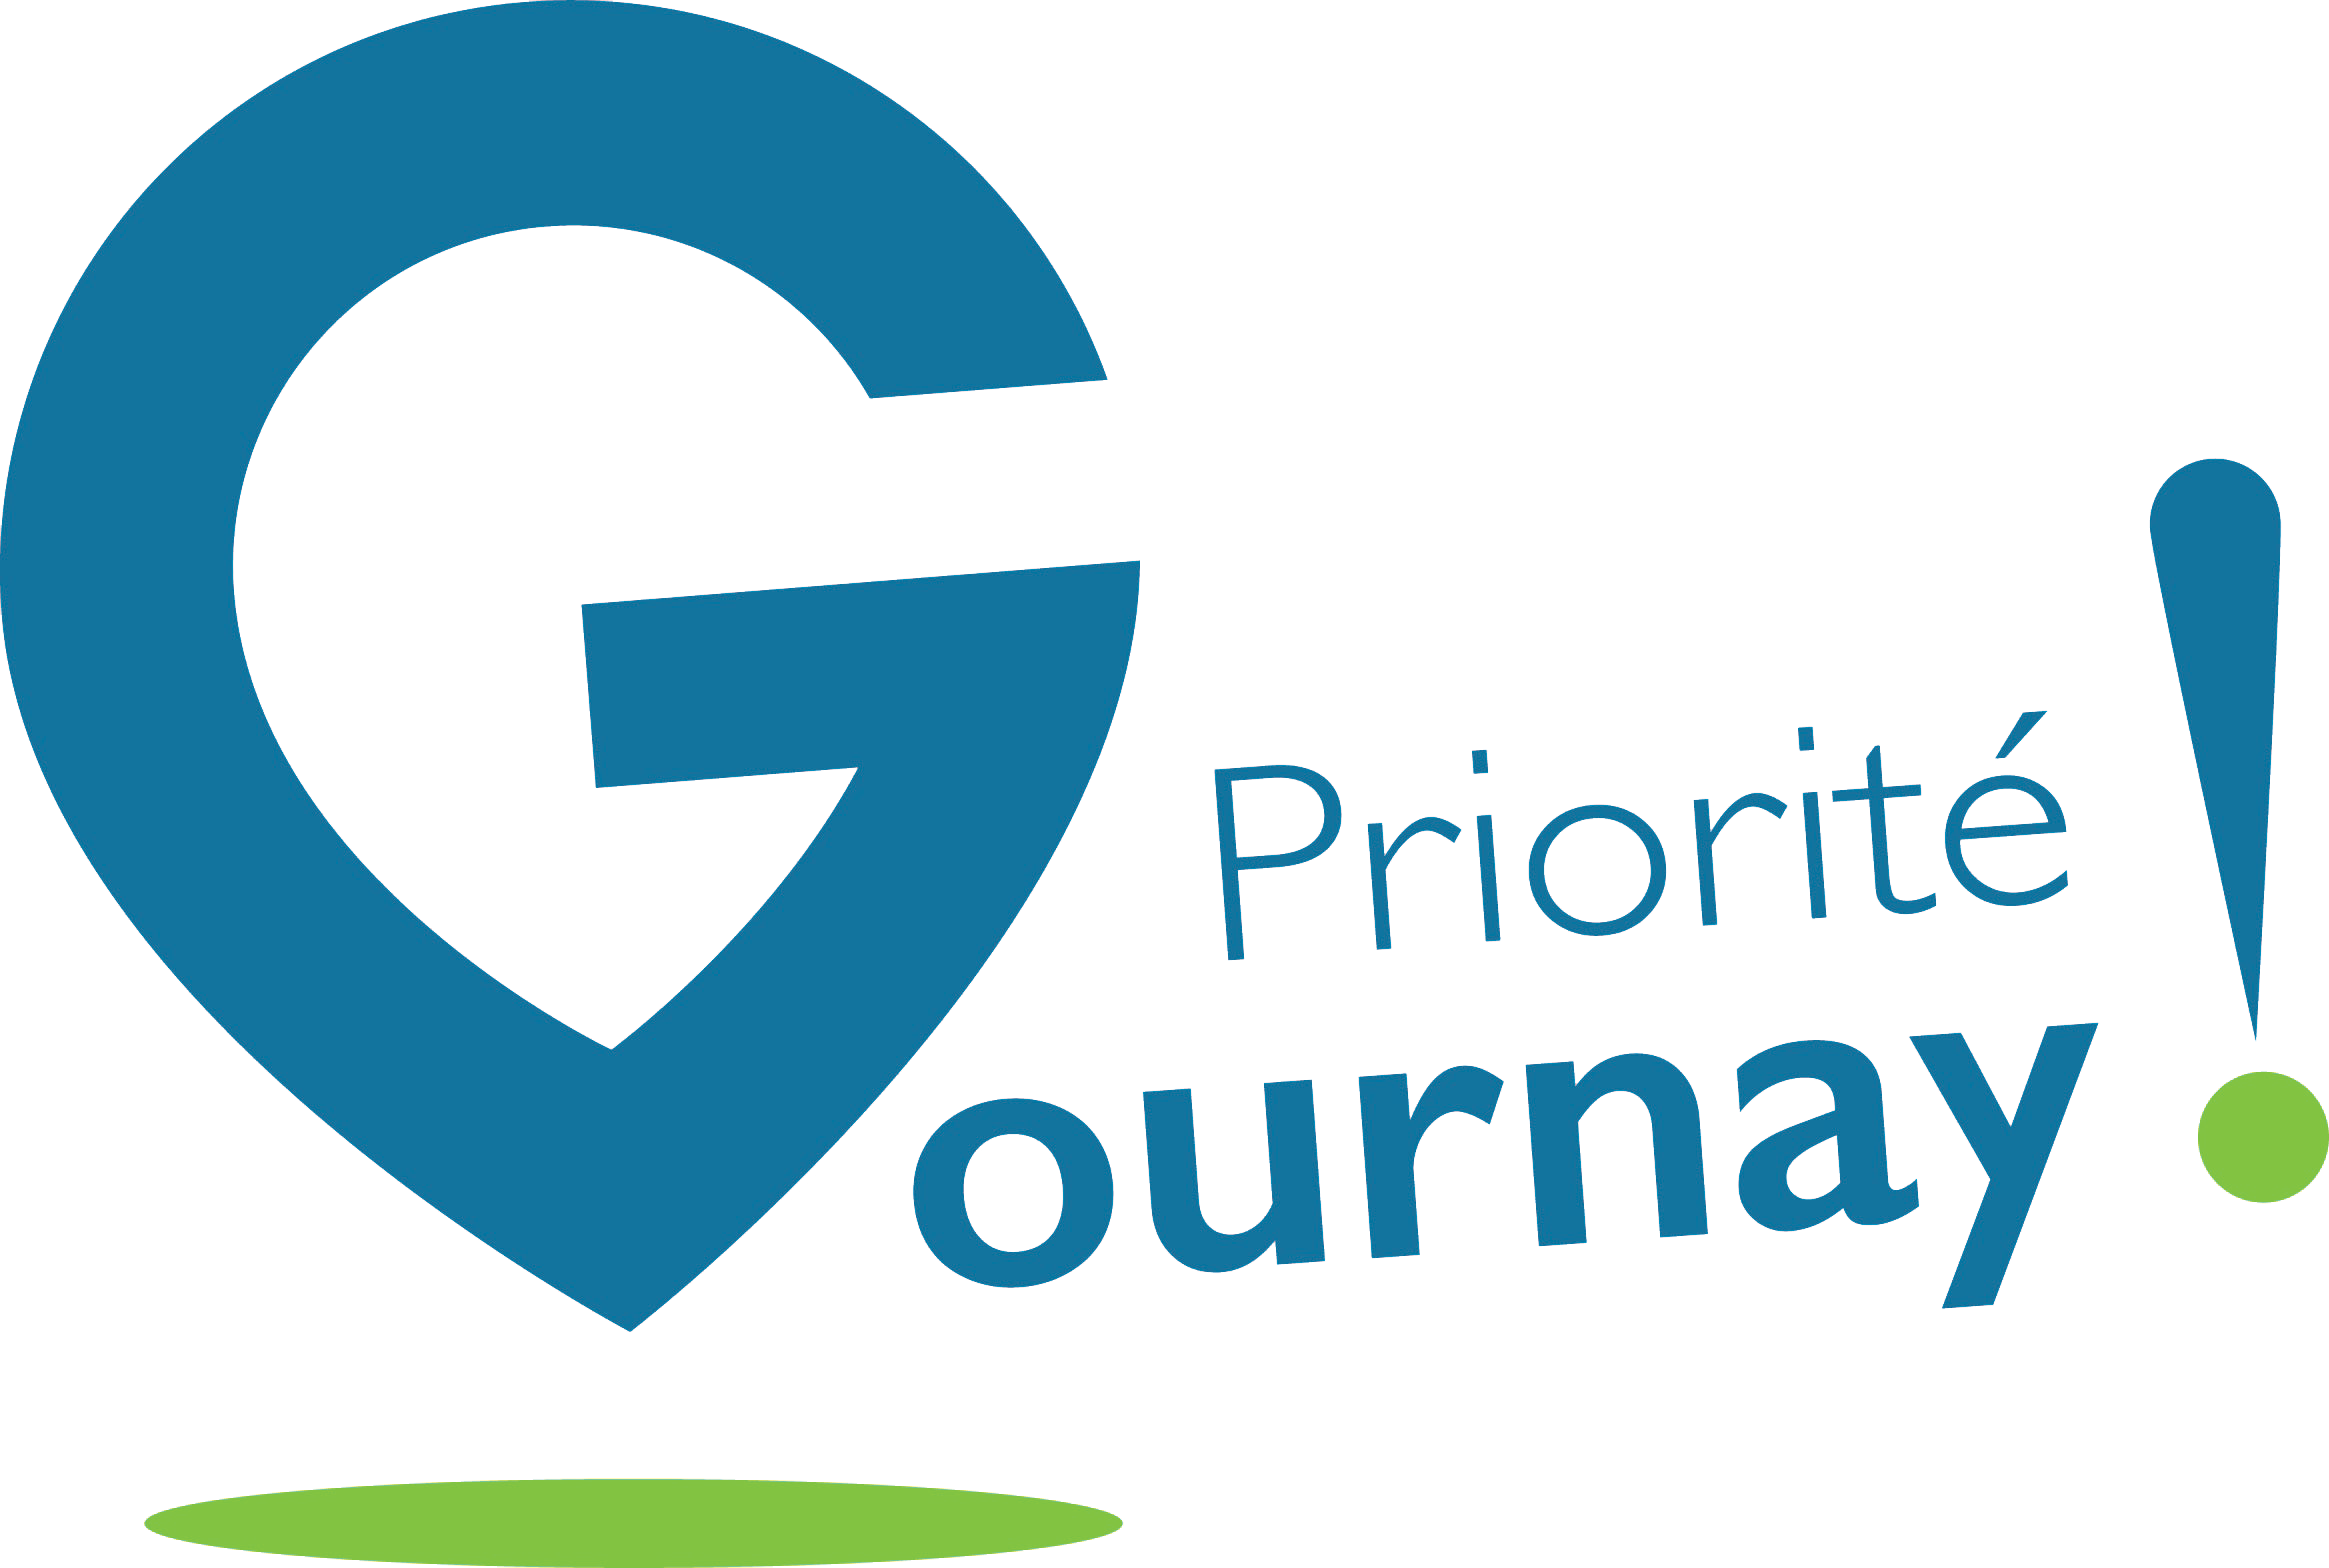 Priorité Gournay !